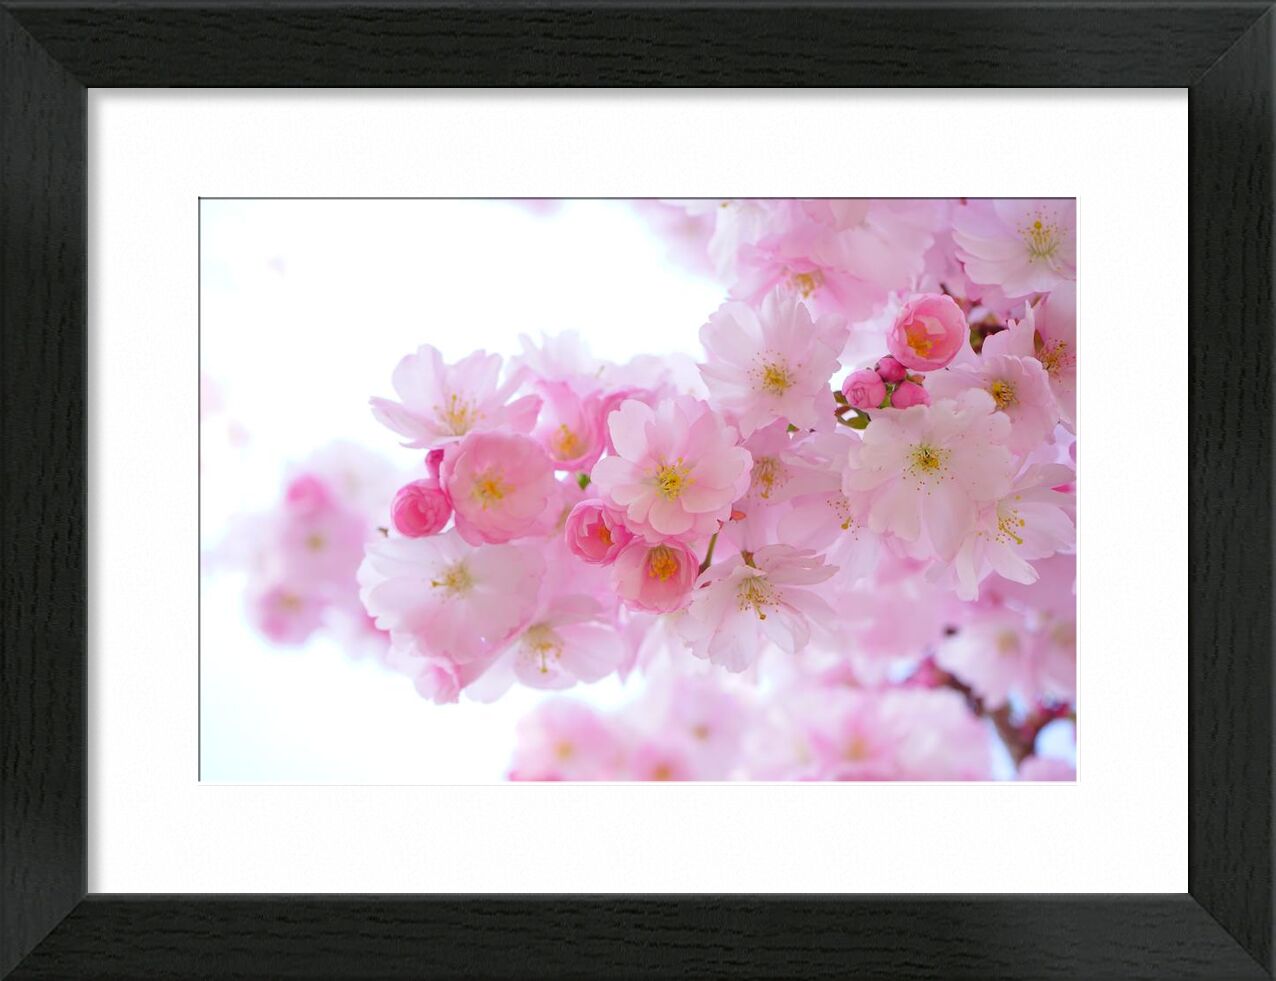 Cherry blossoms from Pierre Gaultier, Prodi Art, bloom, blossom, cherry blossom, flora, flowers, pink, spring, tree